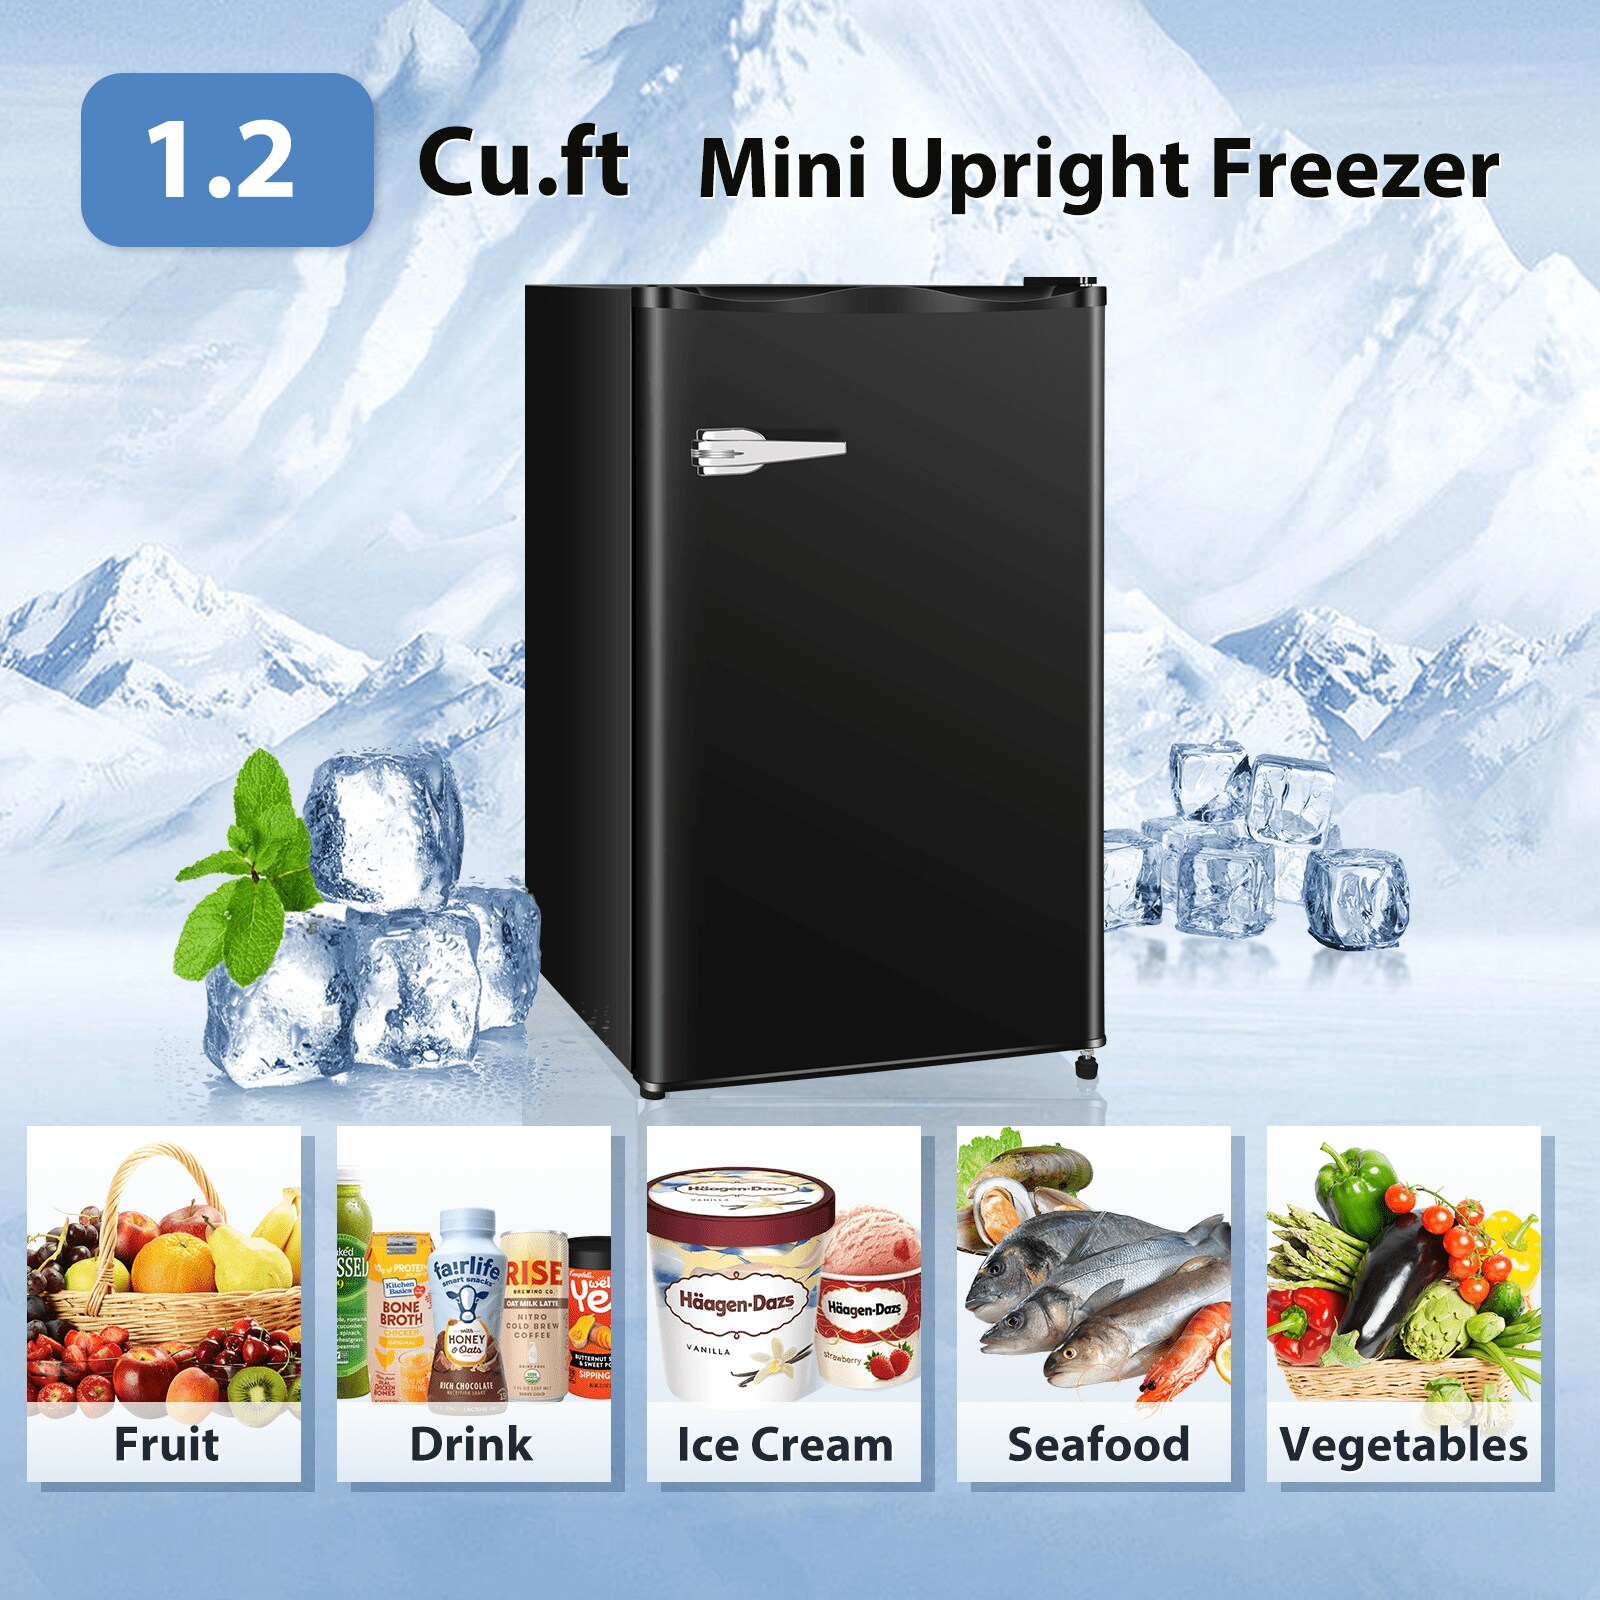 COWSAR 2.3-cu ft Upright Freezer (Black) ENERGY STAR in the Upright ...